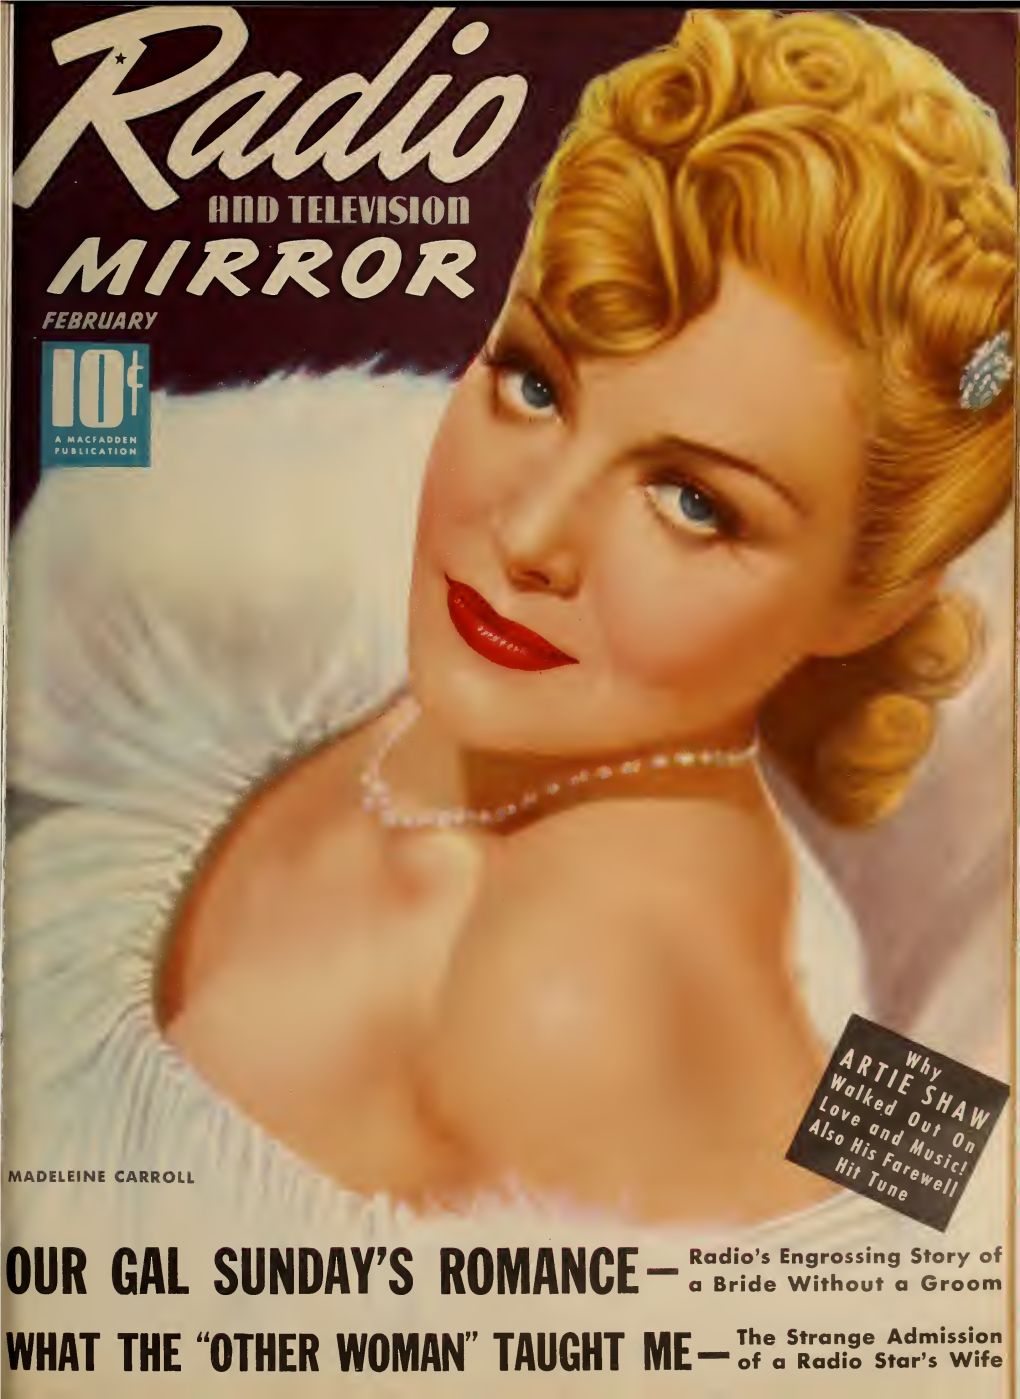 RADIO and TELEVISION MIRROR, Published Monthly by MACFADDEN PUBLICATIONS, Inc., Your Lips Look Youthful, Moist